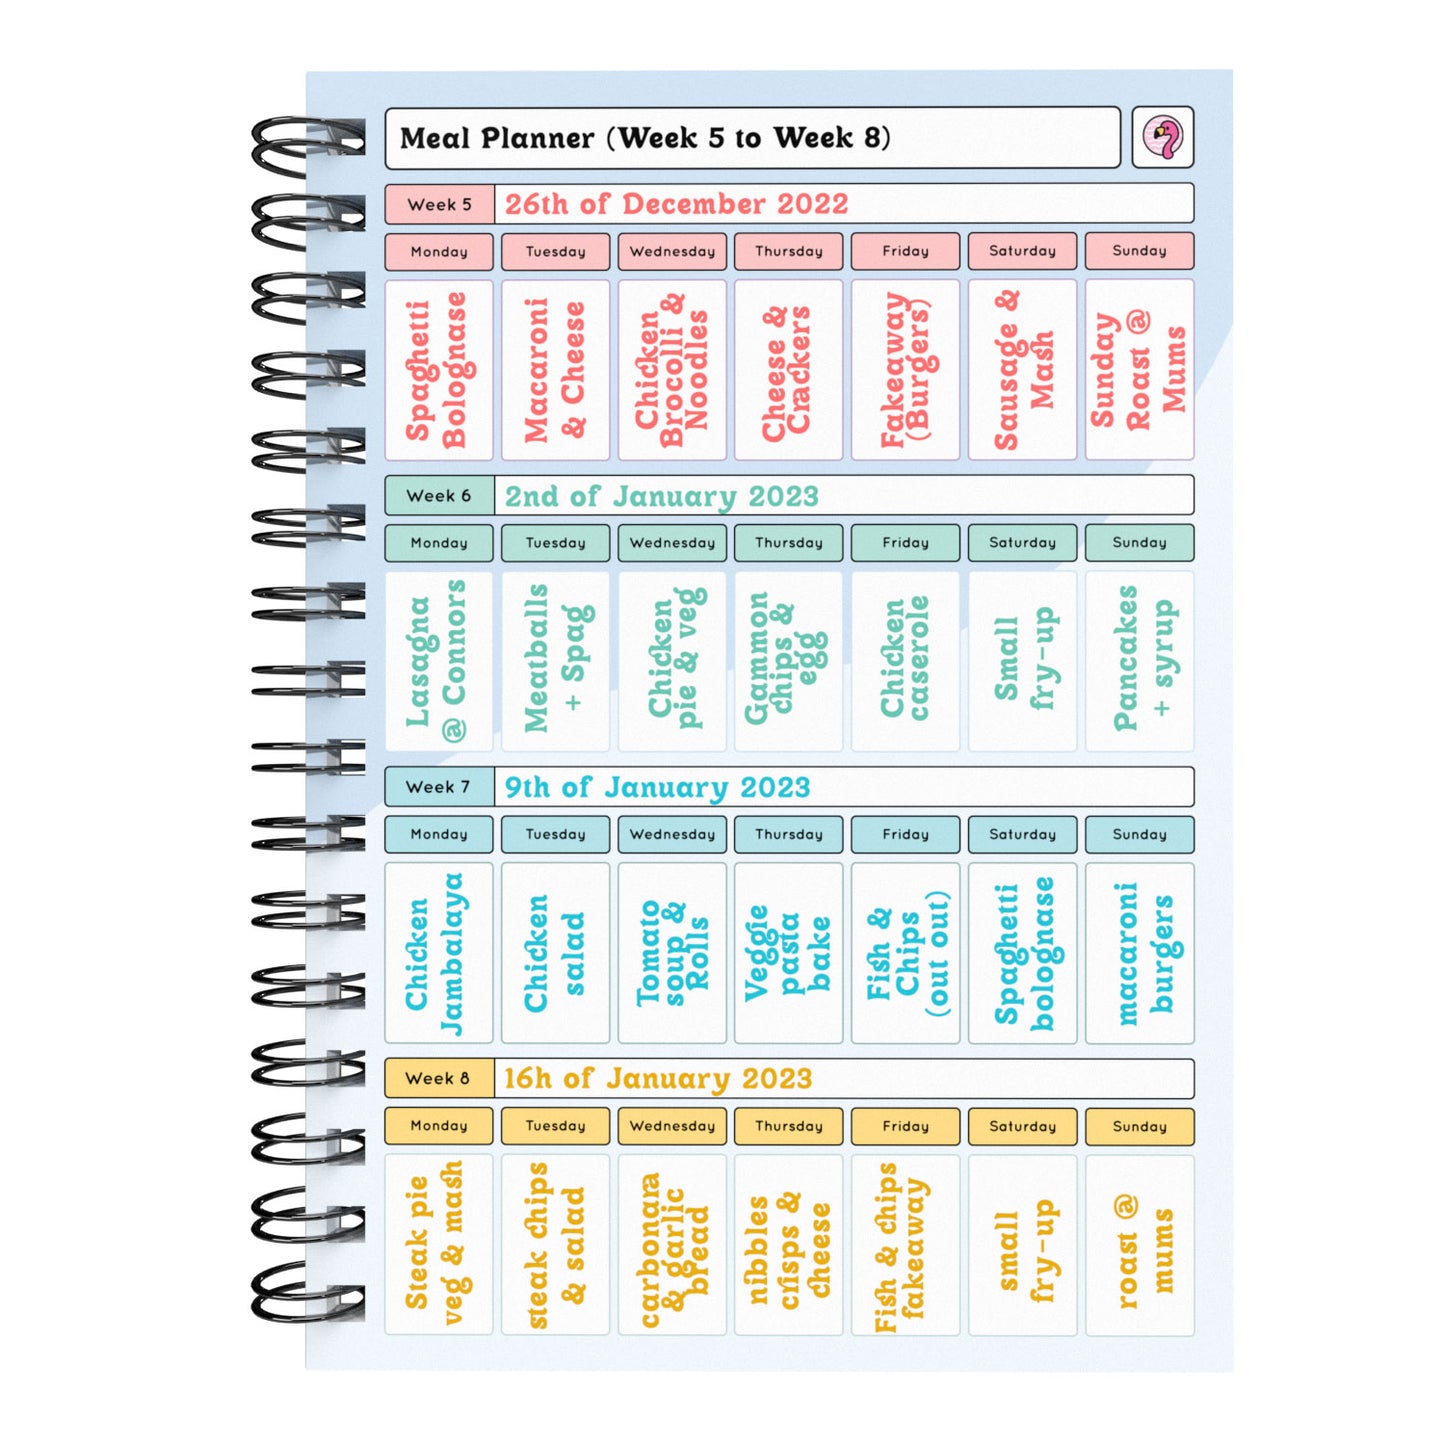 Food Diary - C46 - Calorie Counting